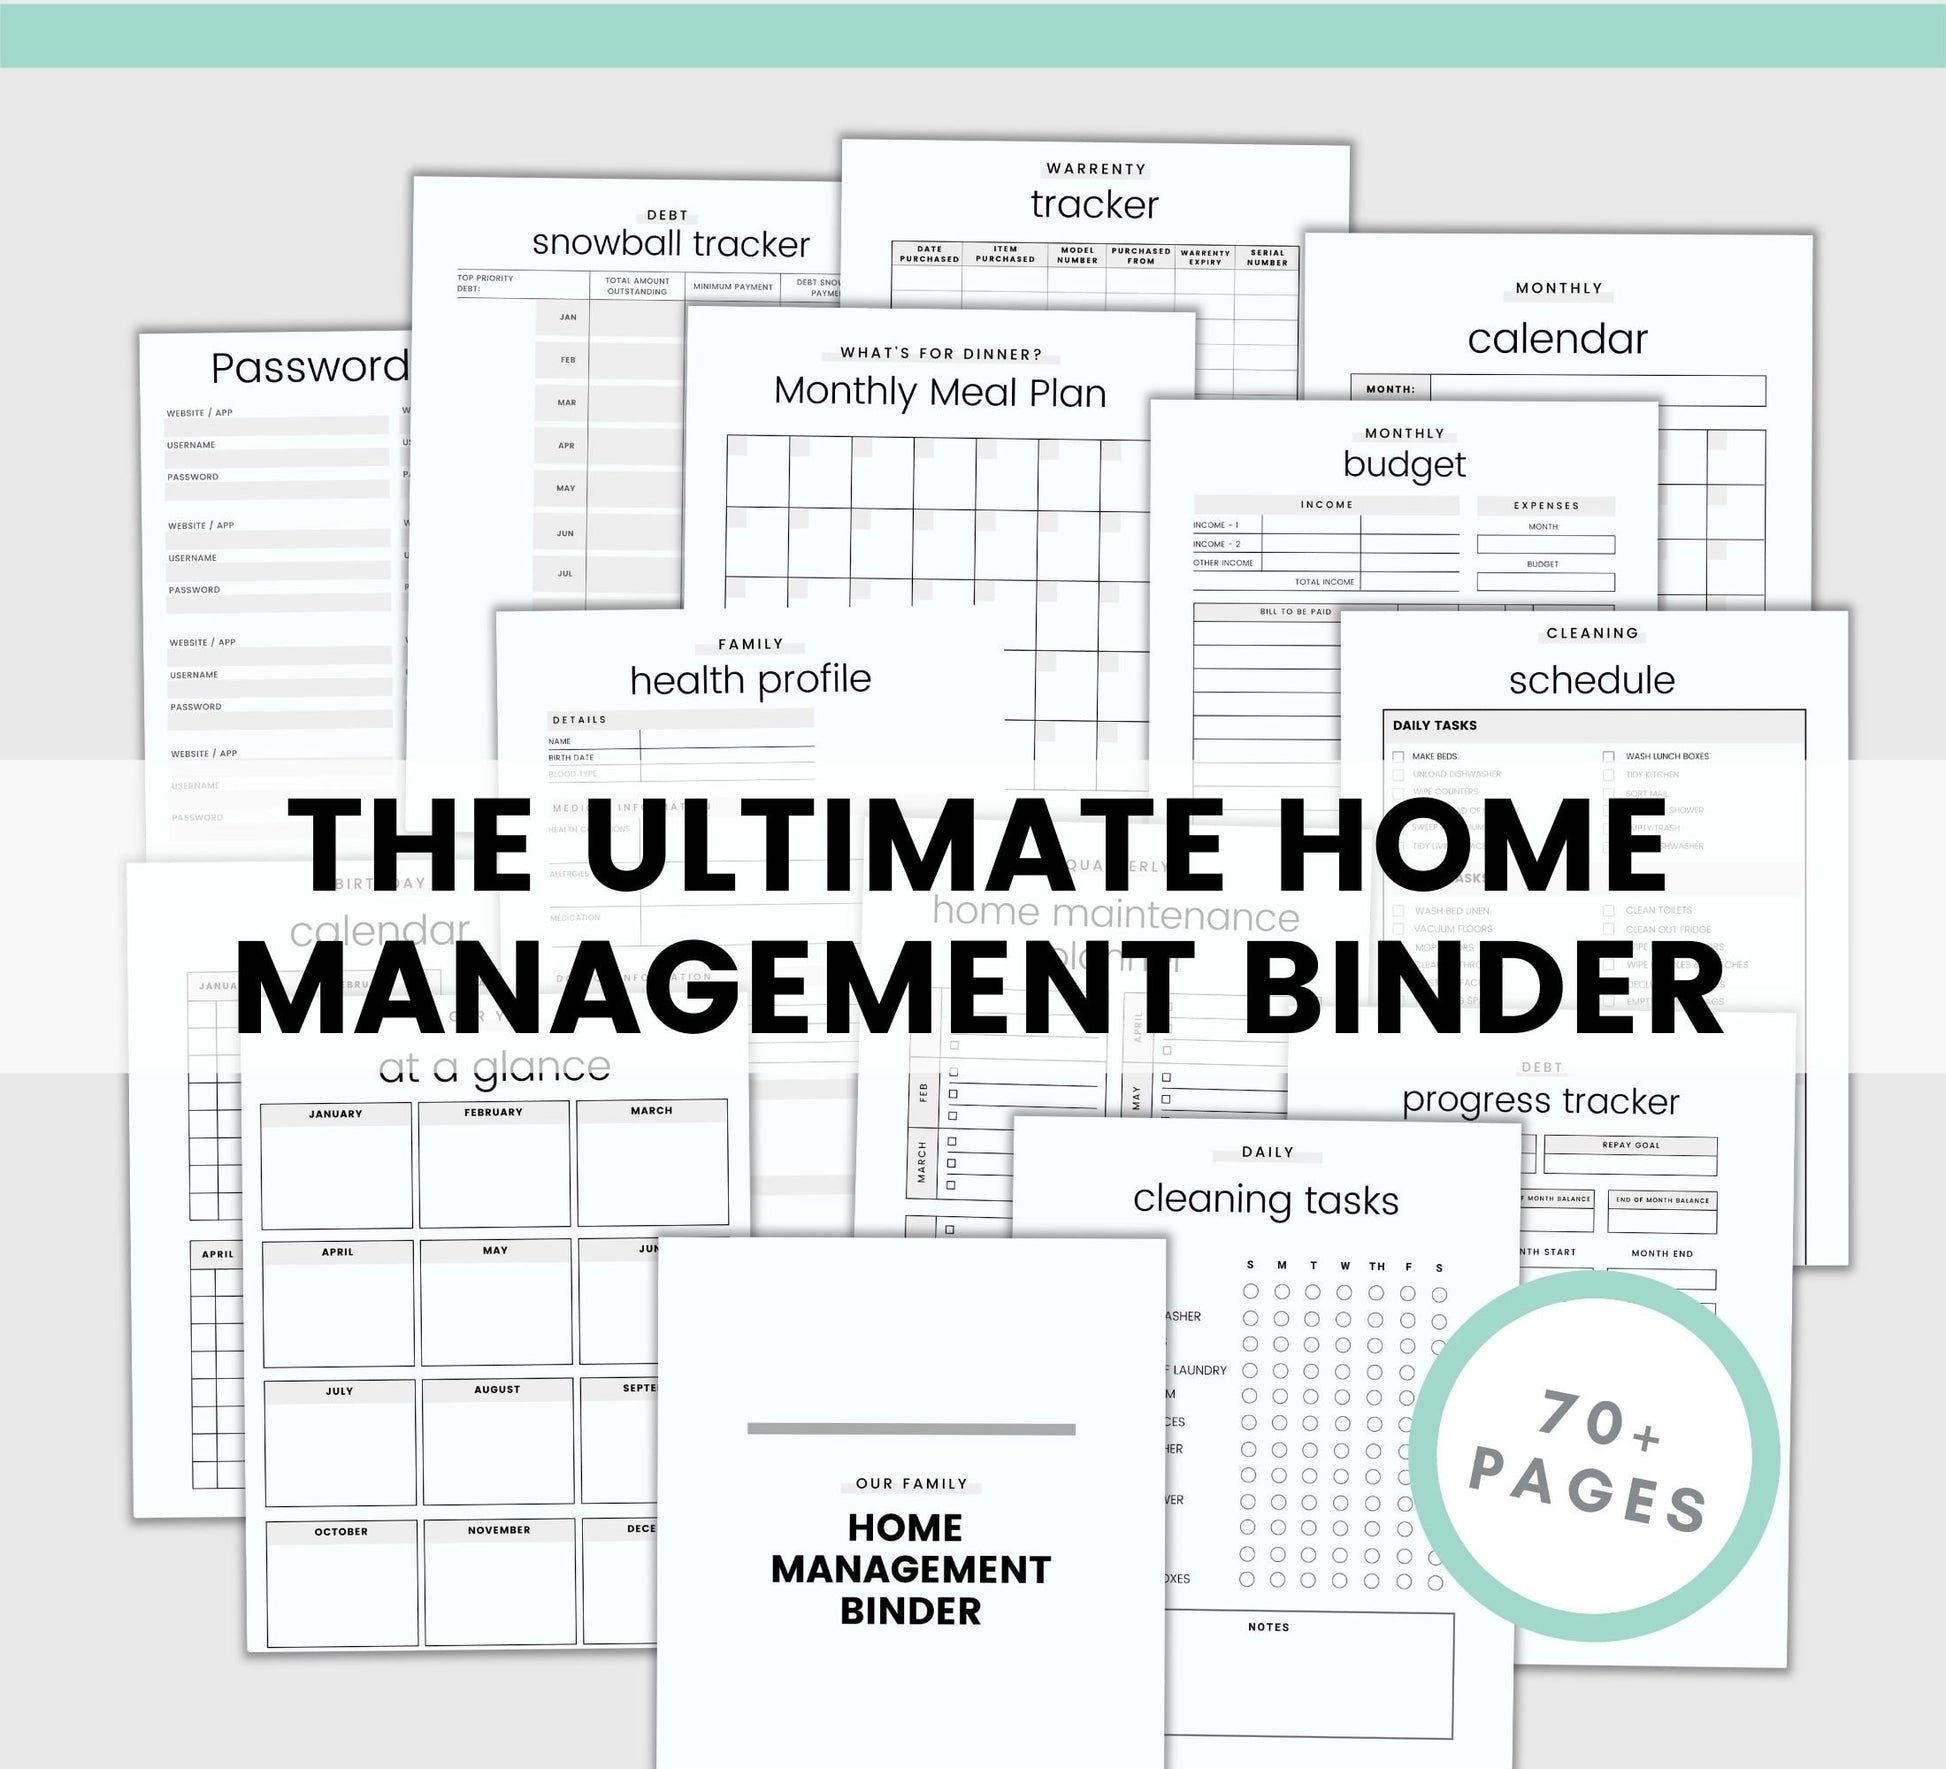 Simplify My Life Home Management Binder Kit - Simplify Create Inspire